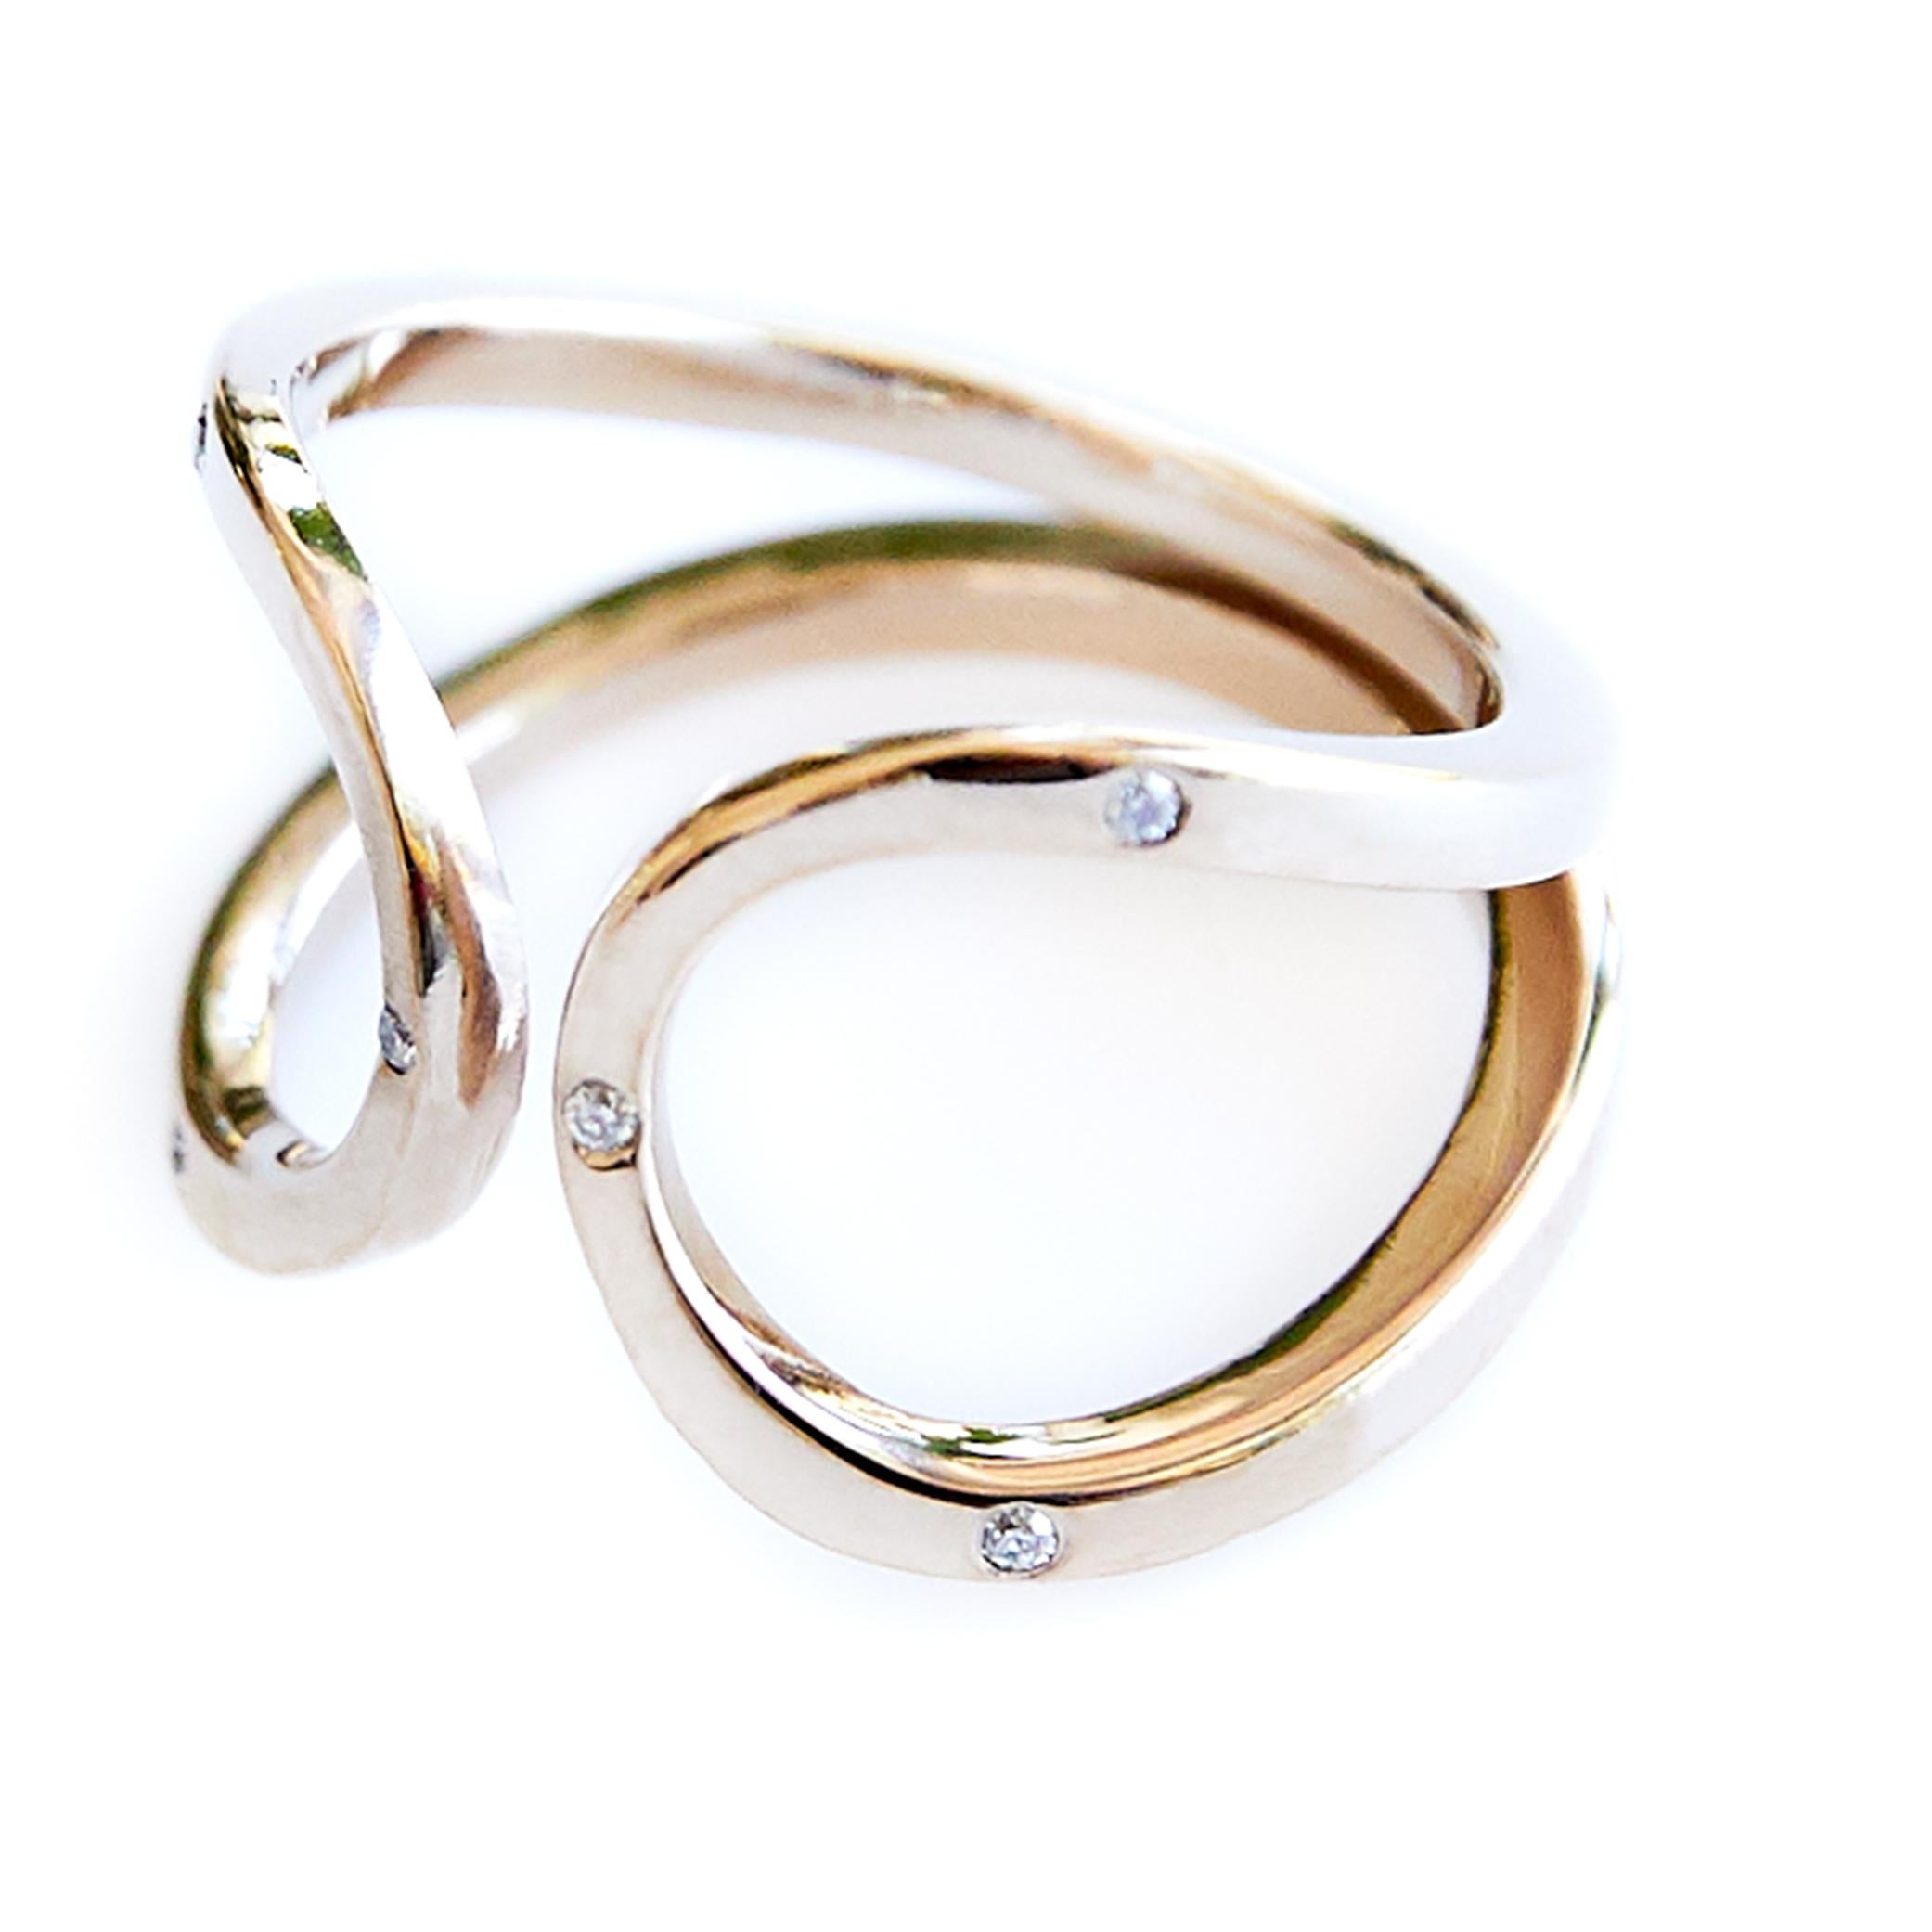 Contemporary Double Band Ring Gold Vermeil White Diamond Cocktail Ring Adjustable J Dauphin For Sale